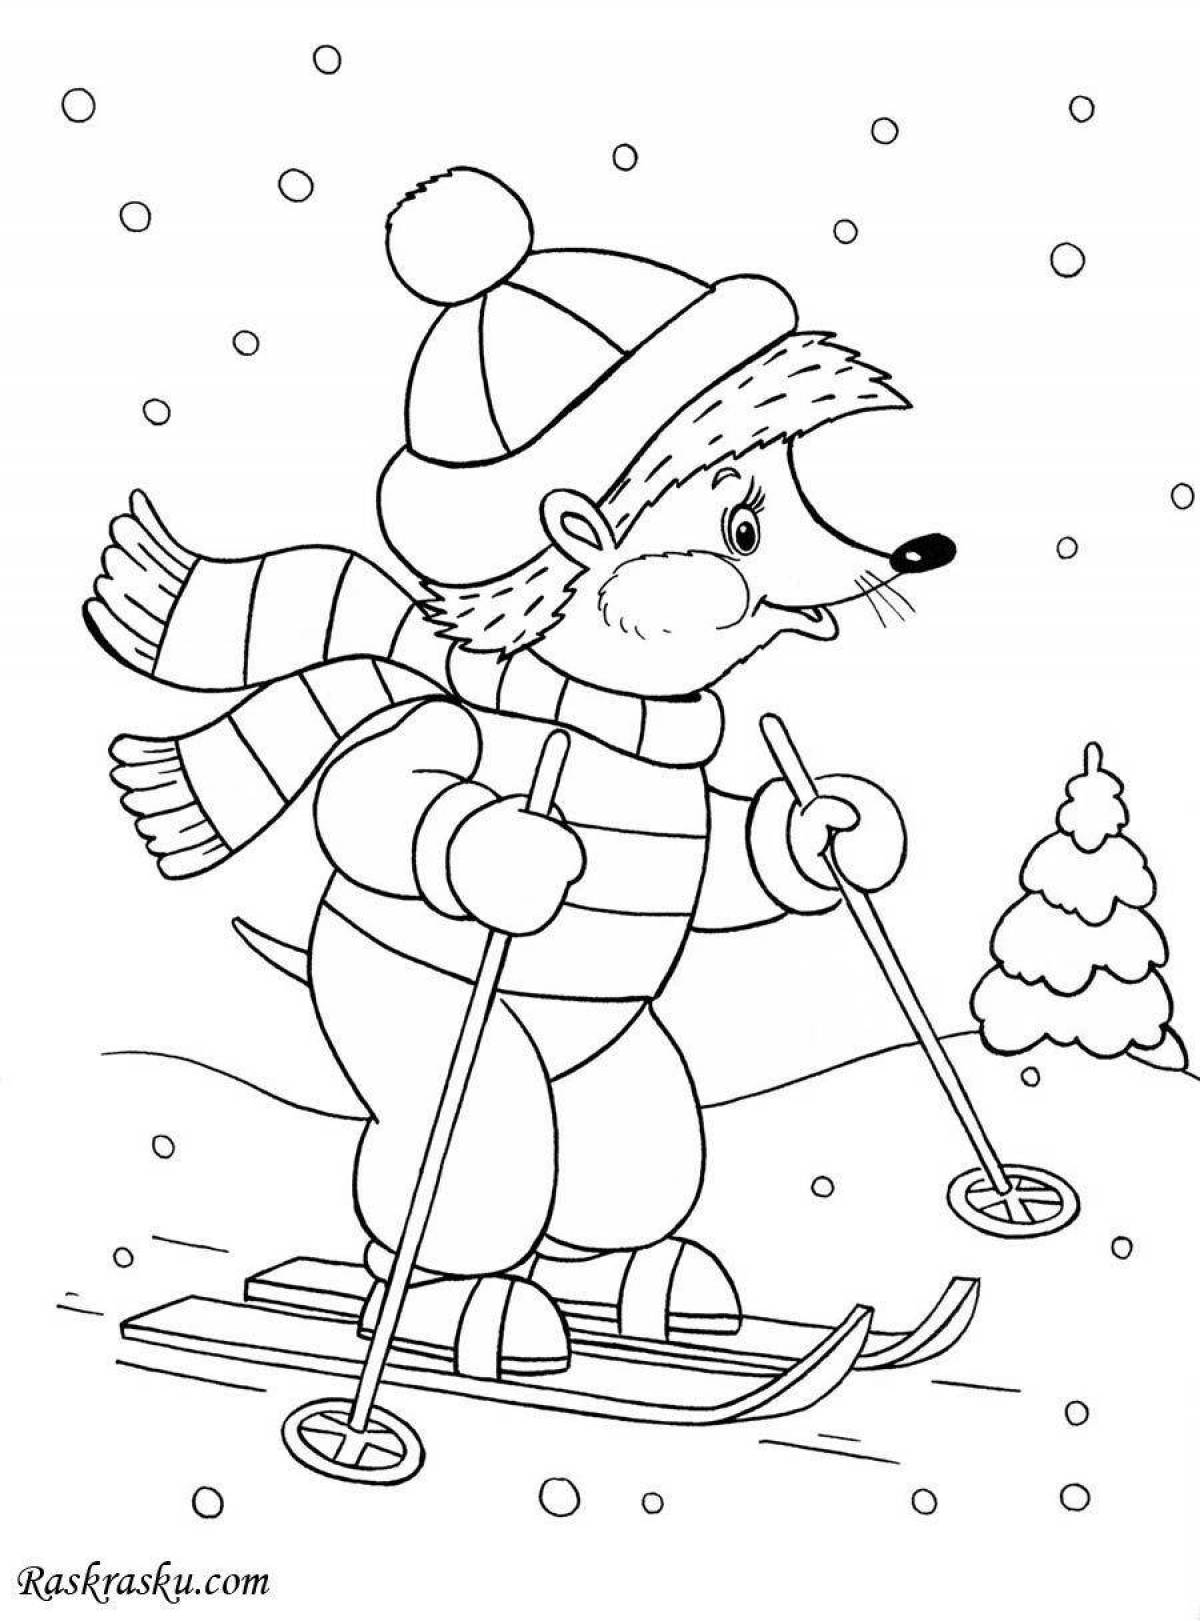 Amazing winter coloring book for kids 5 years old